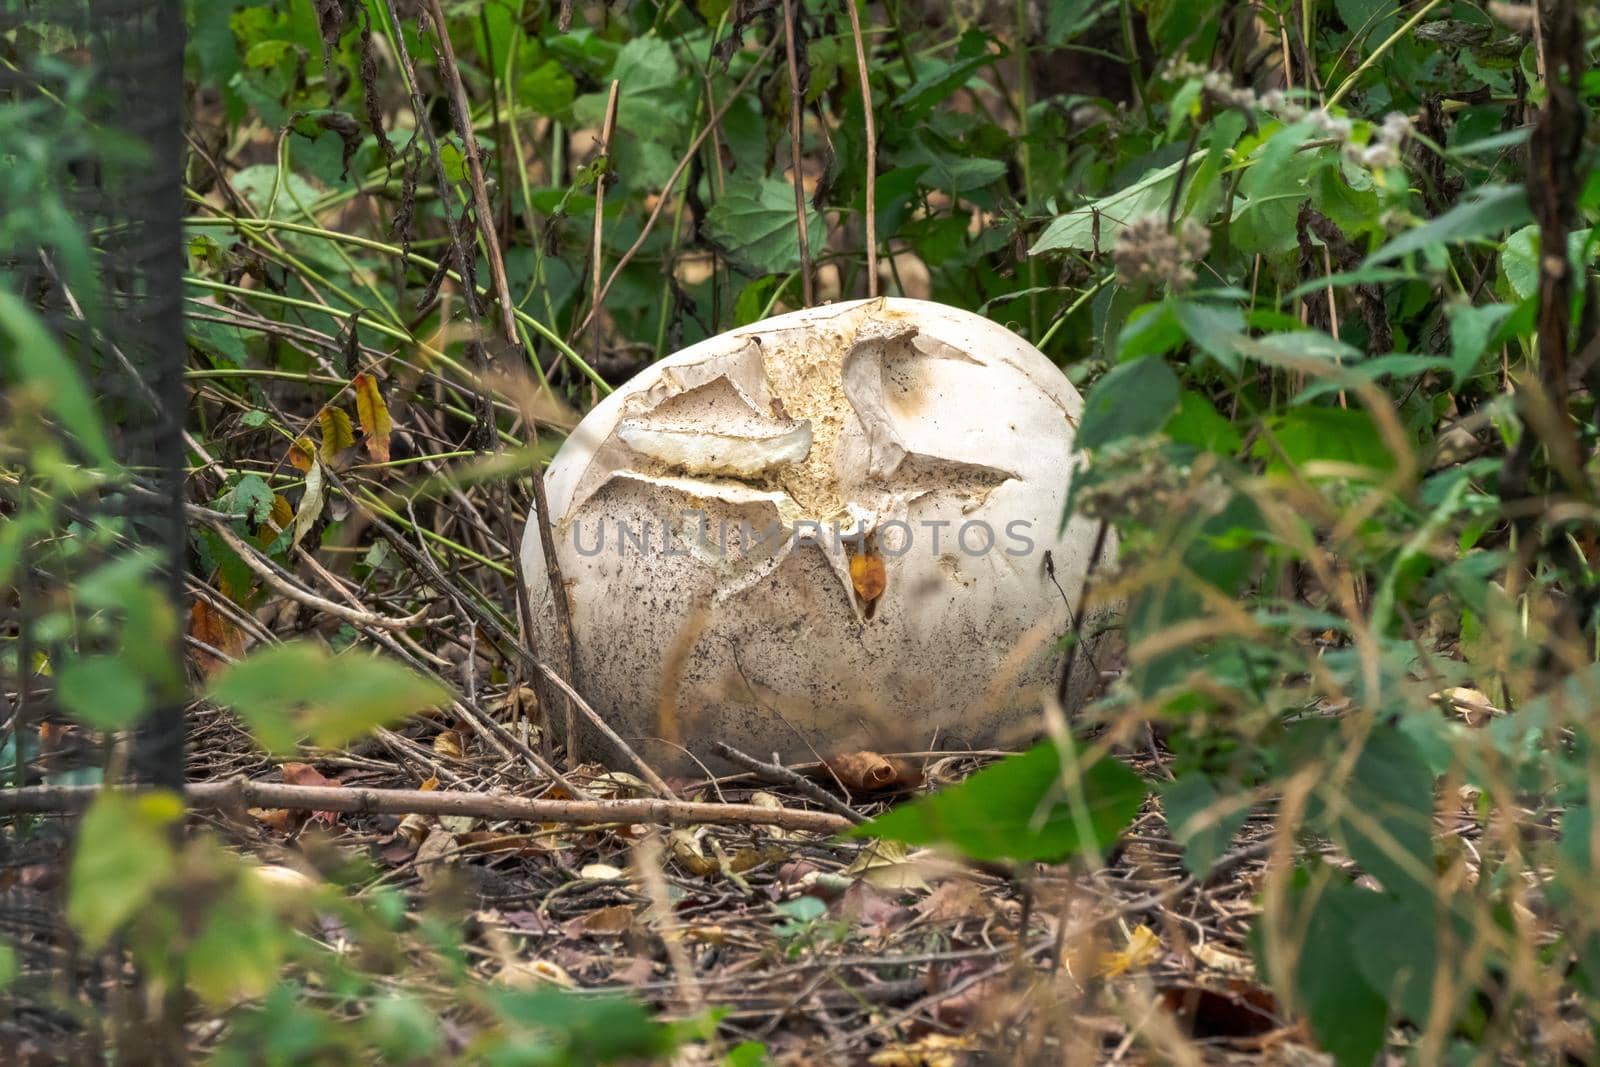 A close up photograph of a wild giant puffball mushroom in a forest that is over mature and split open.